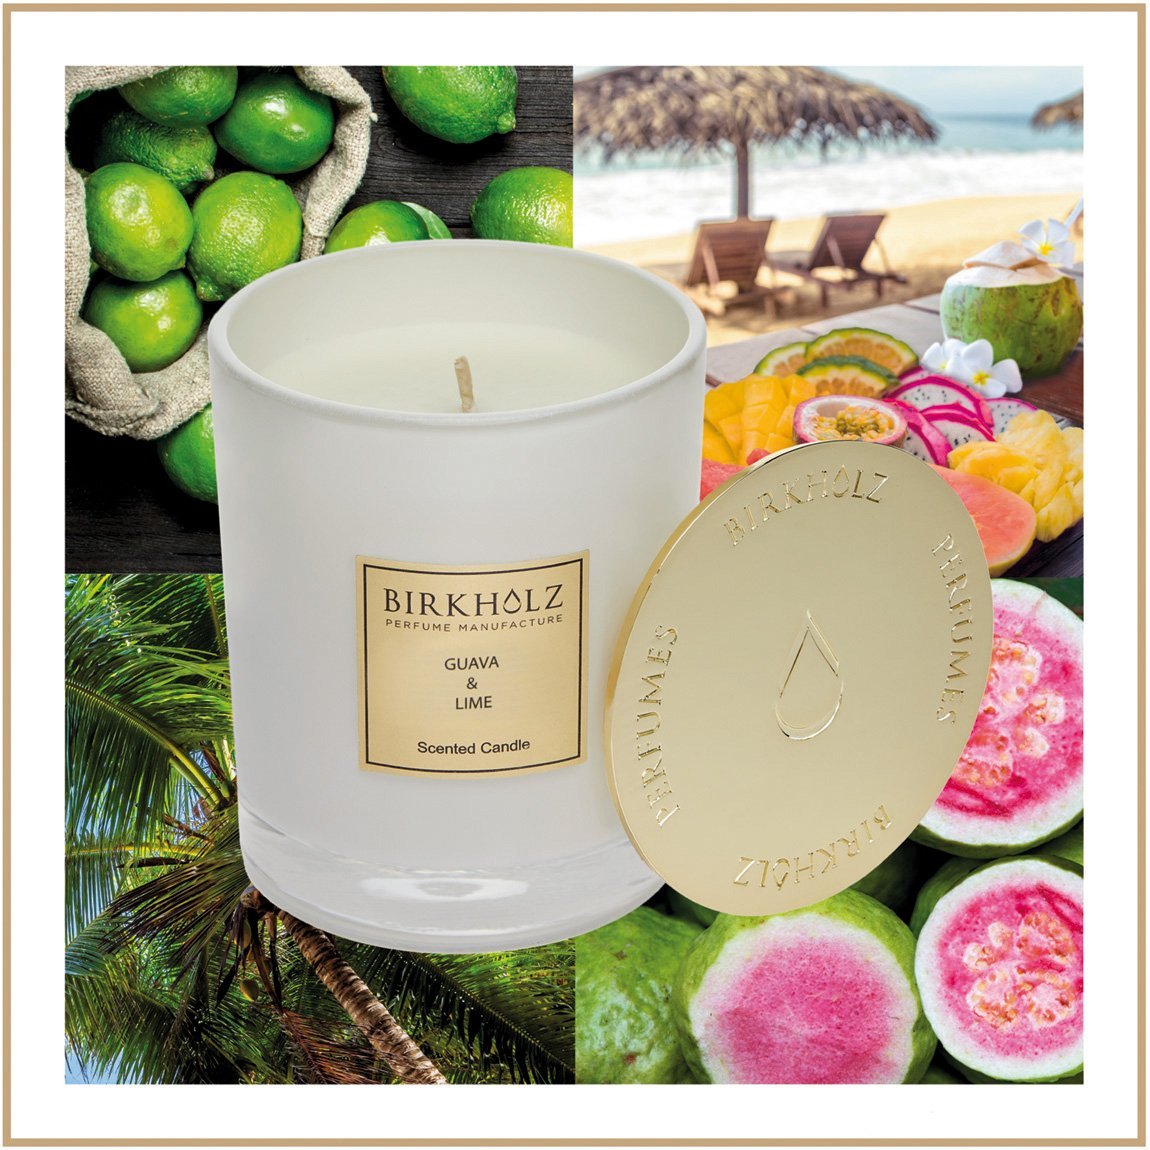 Scented Candle Guava & Lime - Birkholz Perfume Manufacture